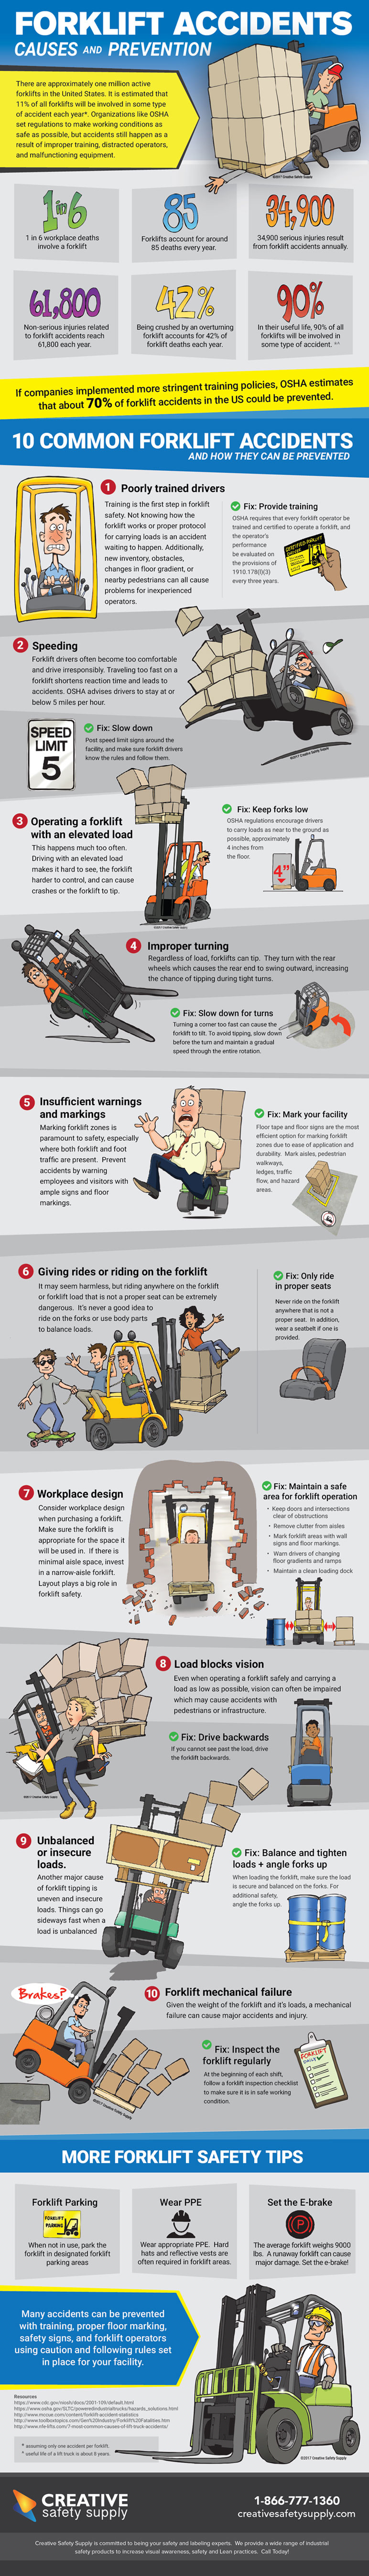 forklift safety and accidents infographic